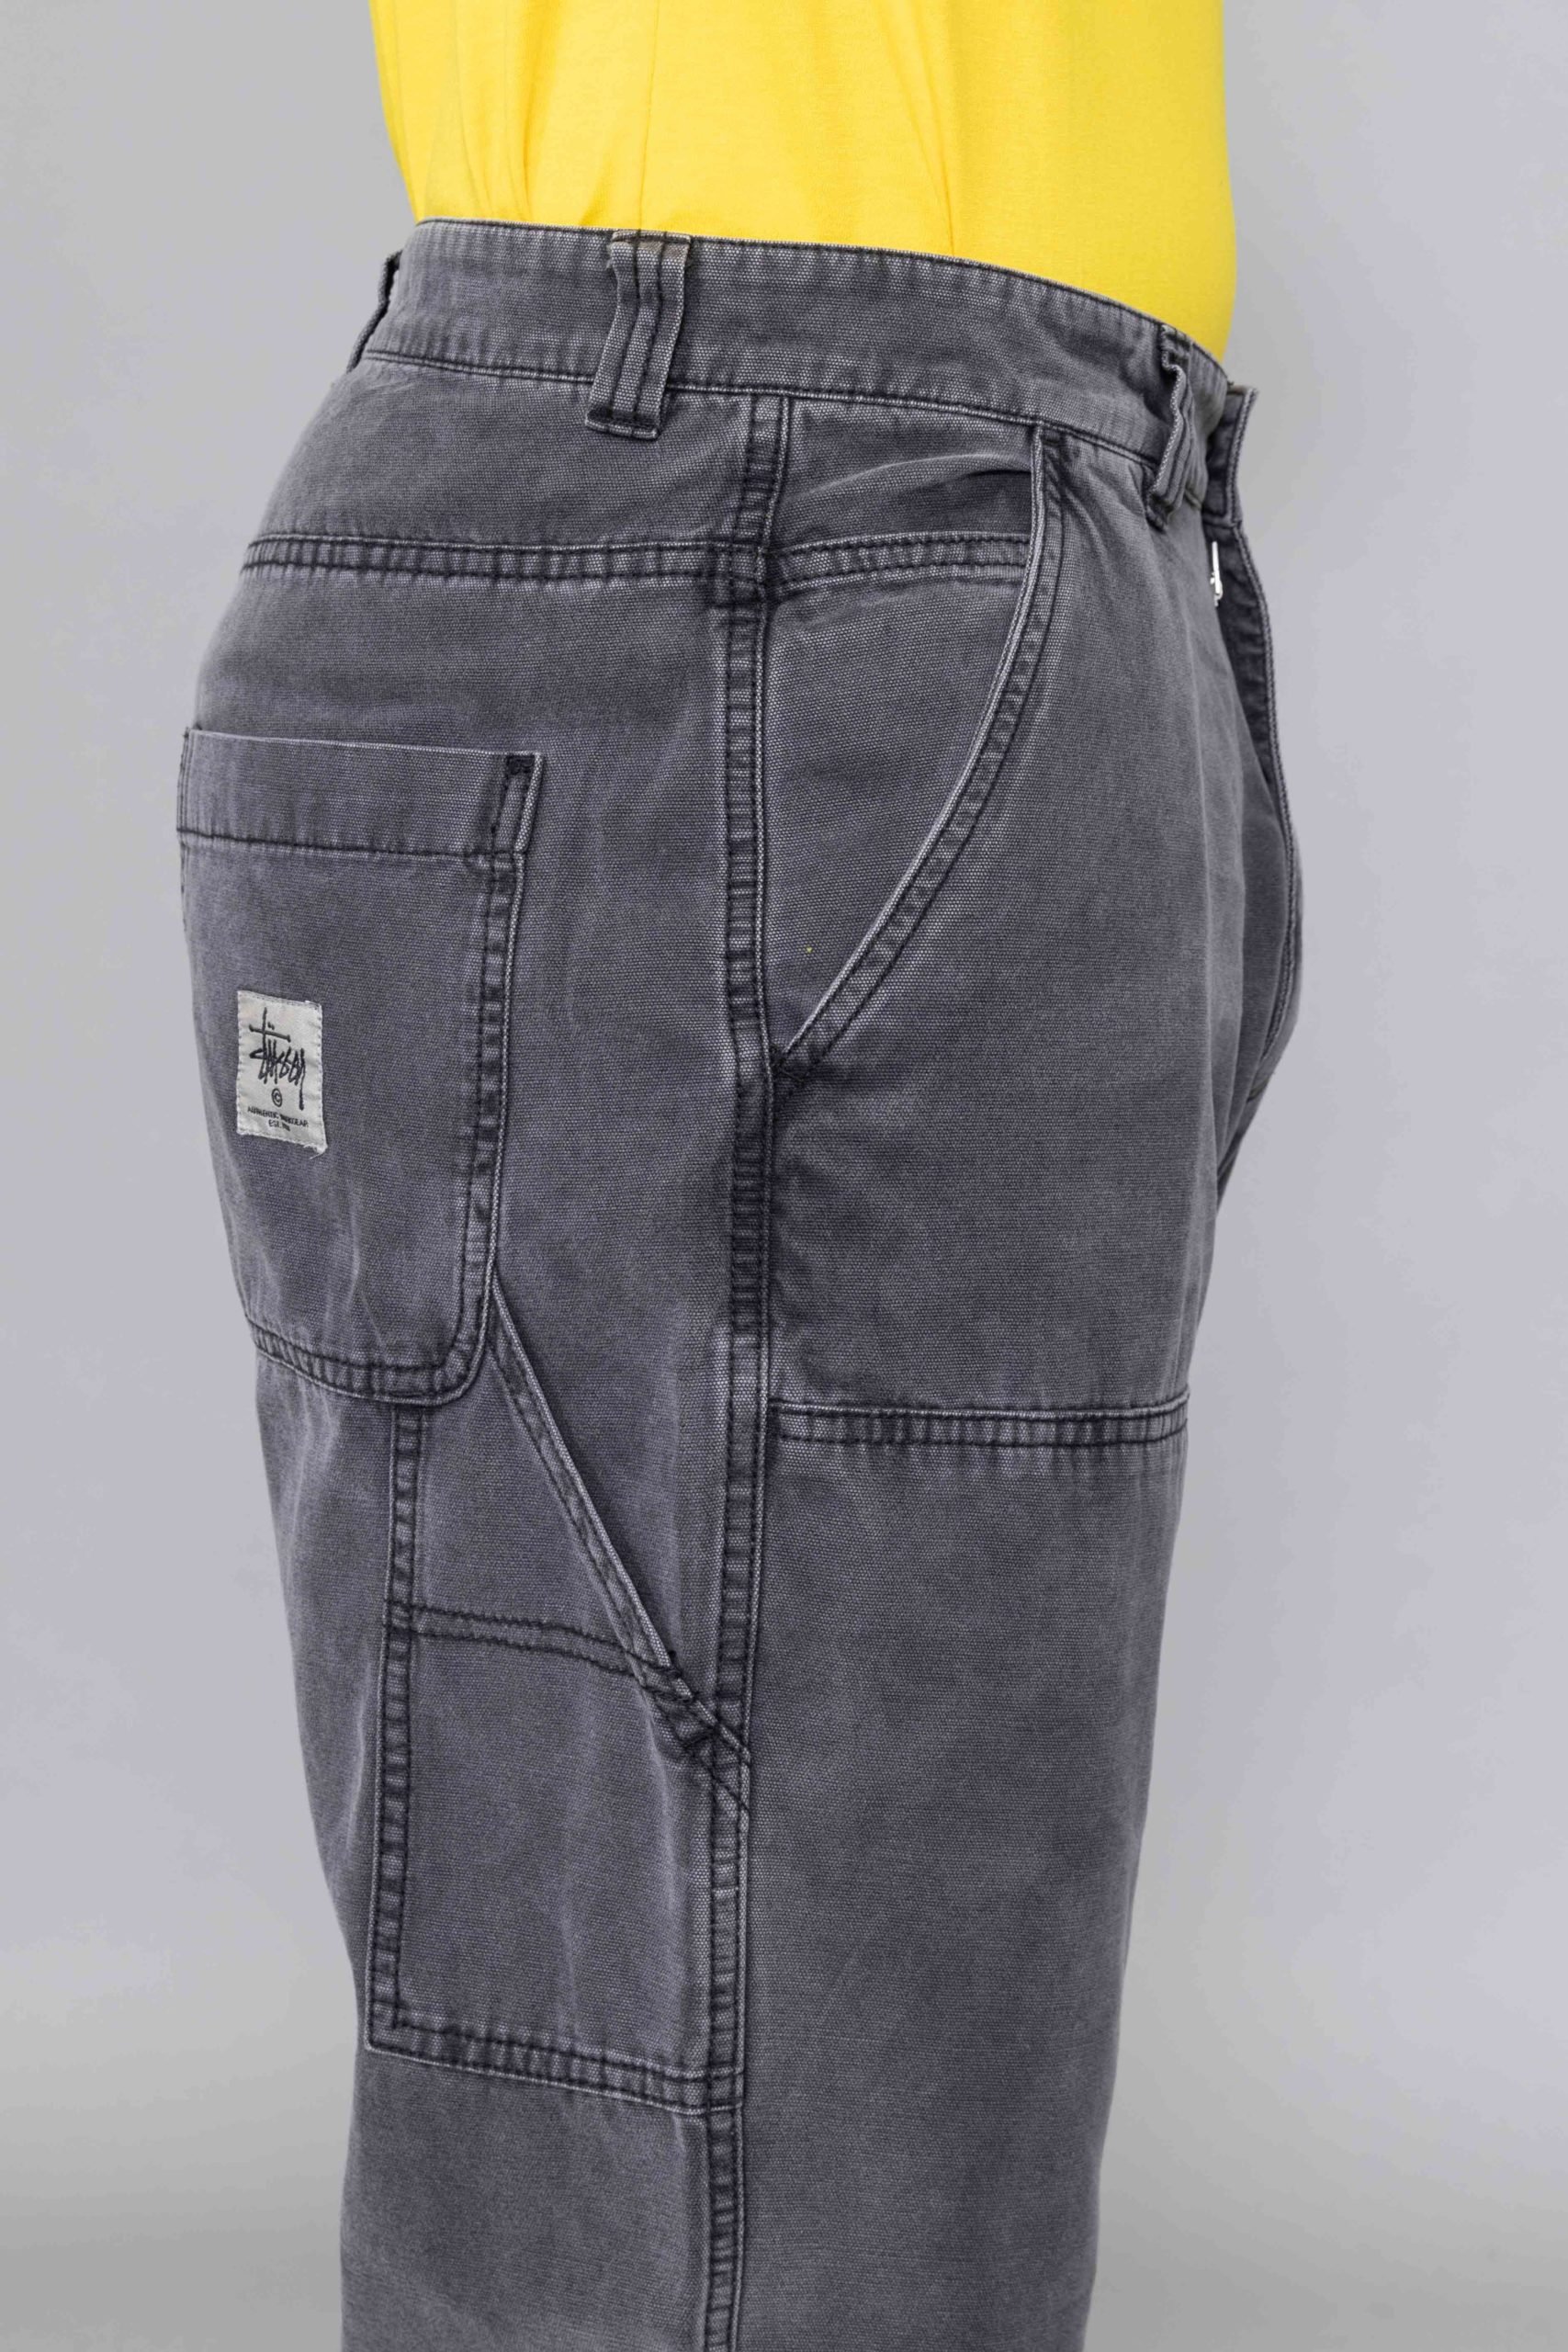 Stussy Washed Canvas Work Pant Grey nike collab - Centrevillestore